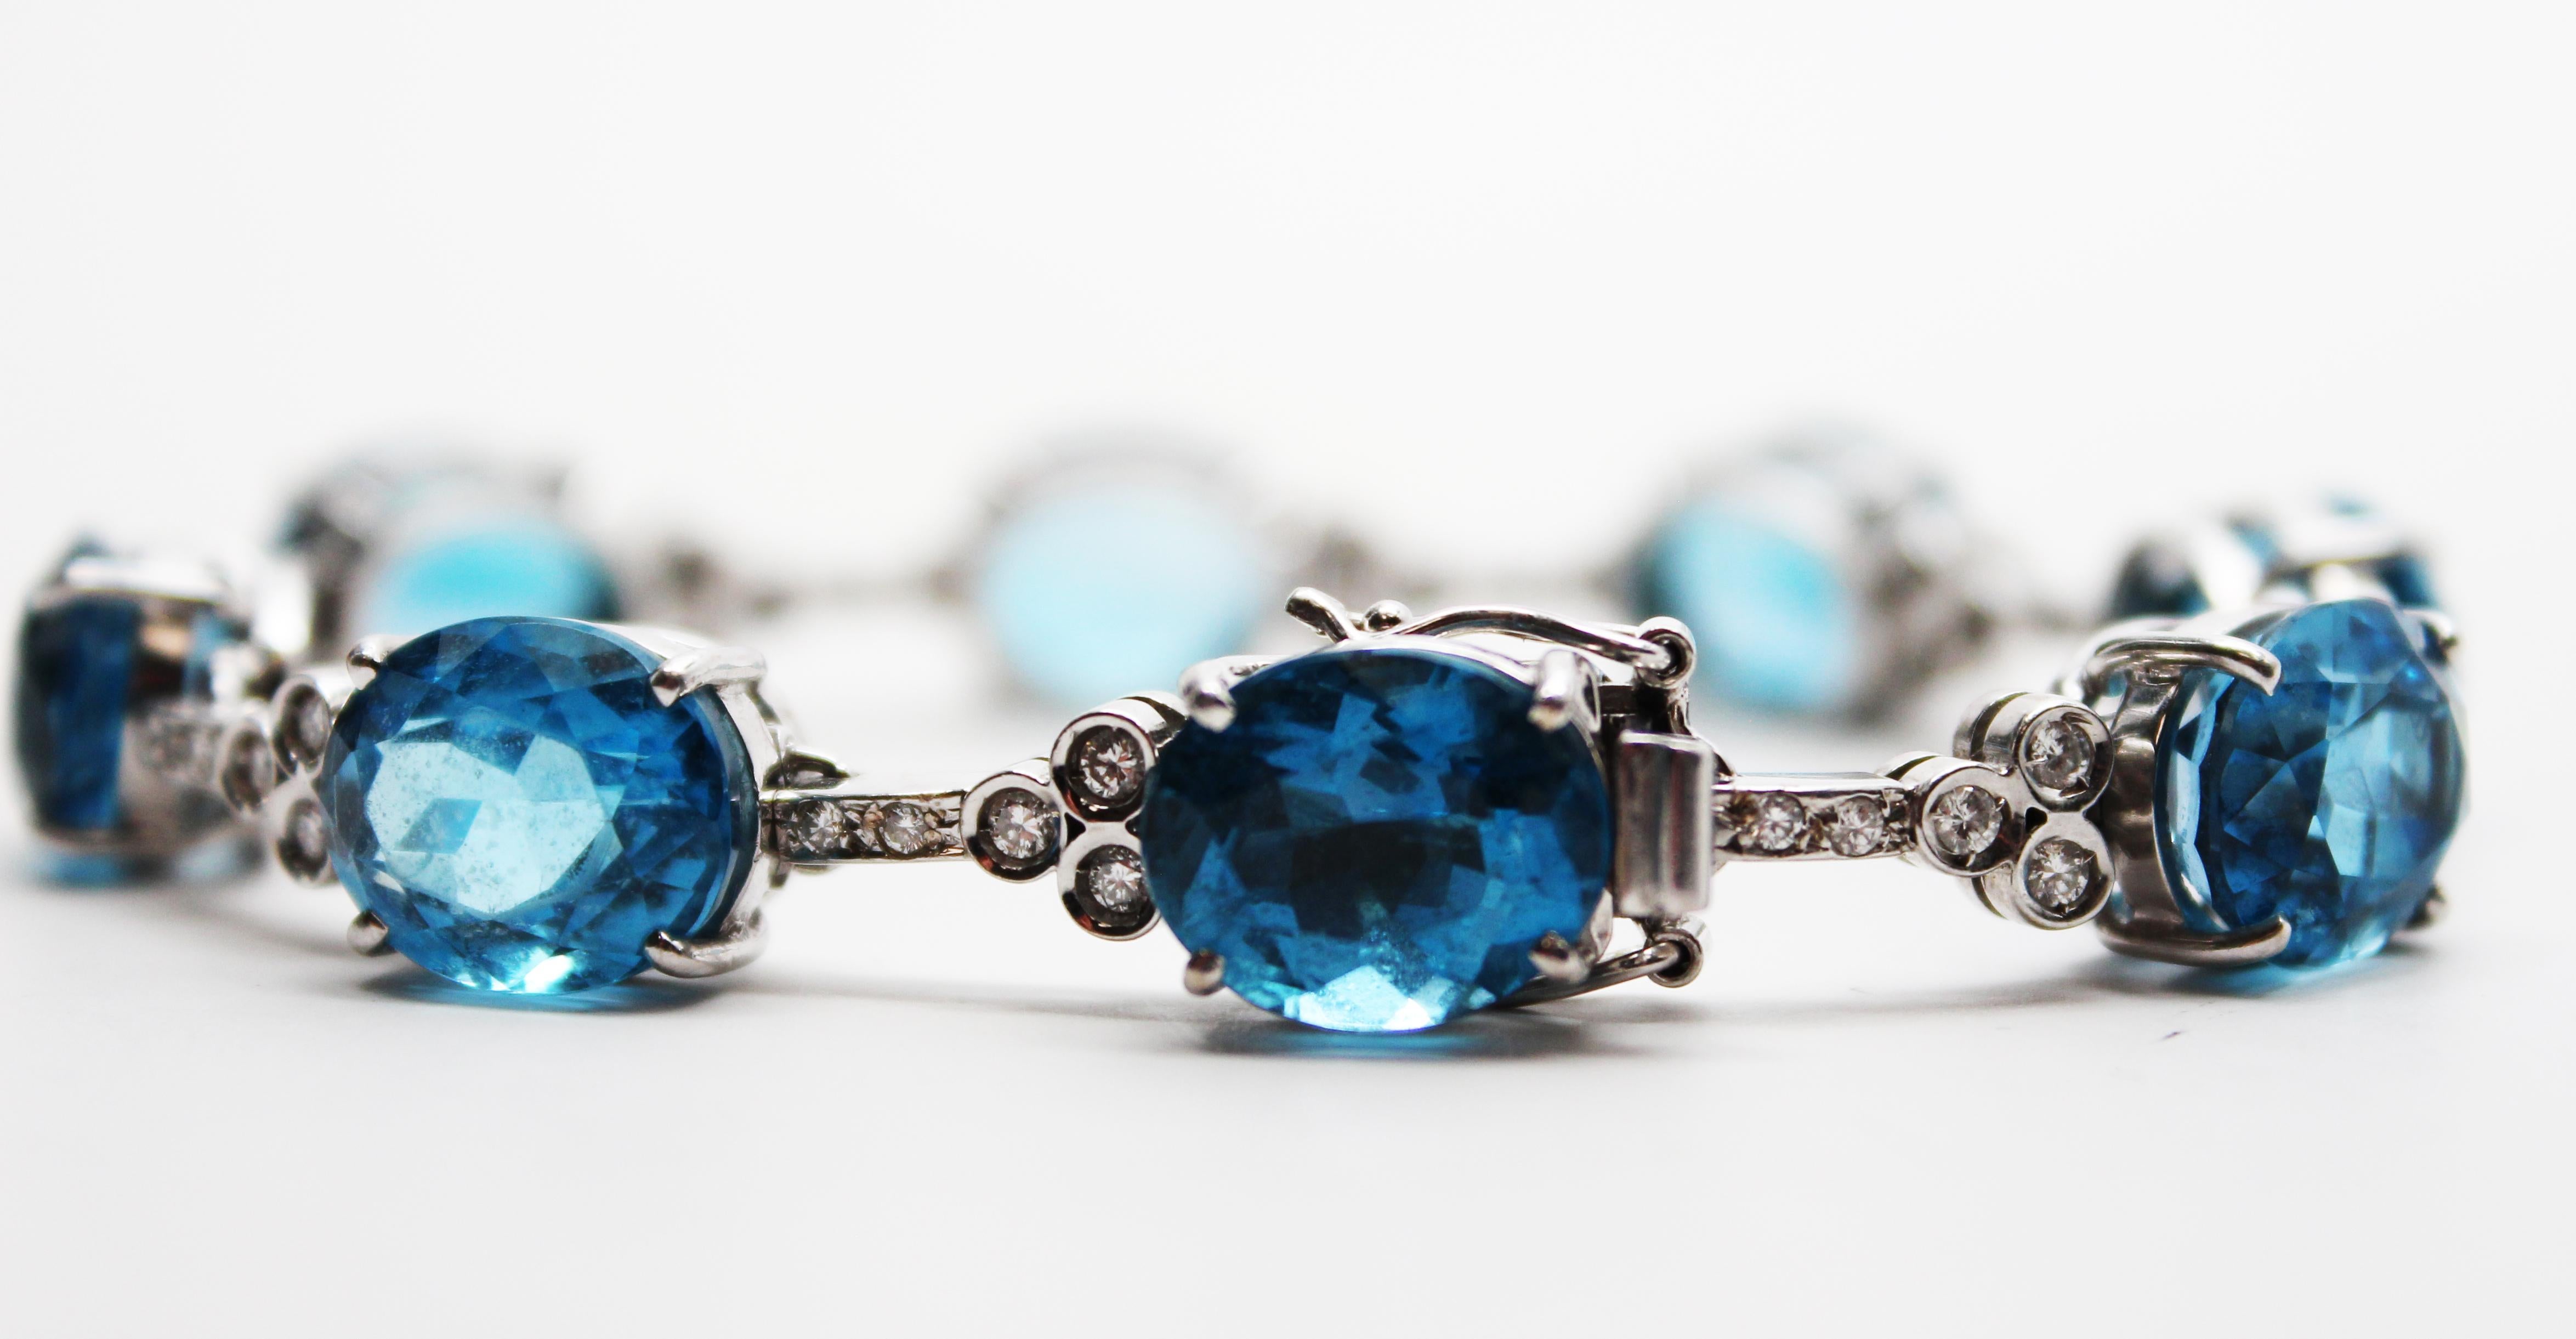 This is a gorgeous bracelet in 18k white gold featuring brilliant white diamonds and lovely blue topaz! The elegant layout of the bracelet features eight oval blue topazes separated by a diamond-set link. Each link is set with five gorgeous round